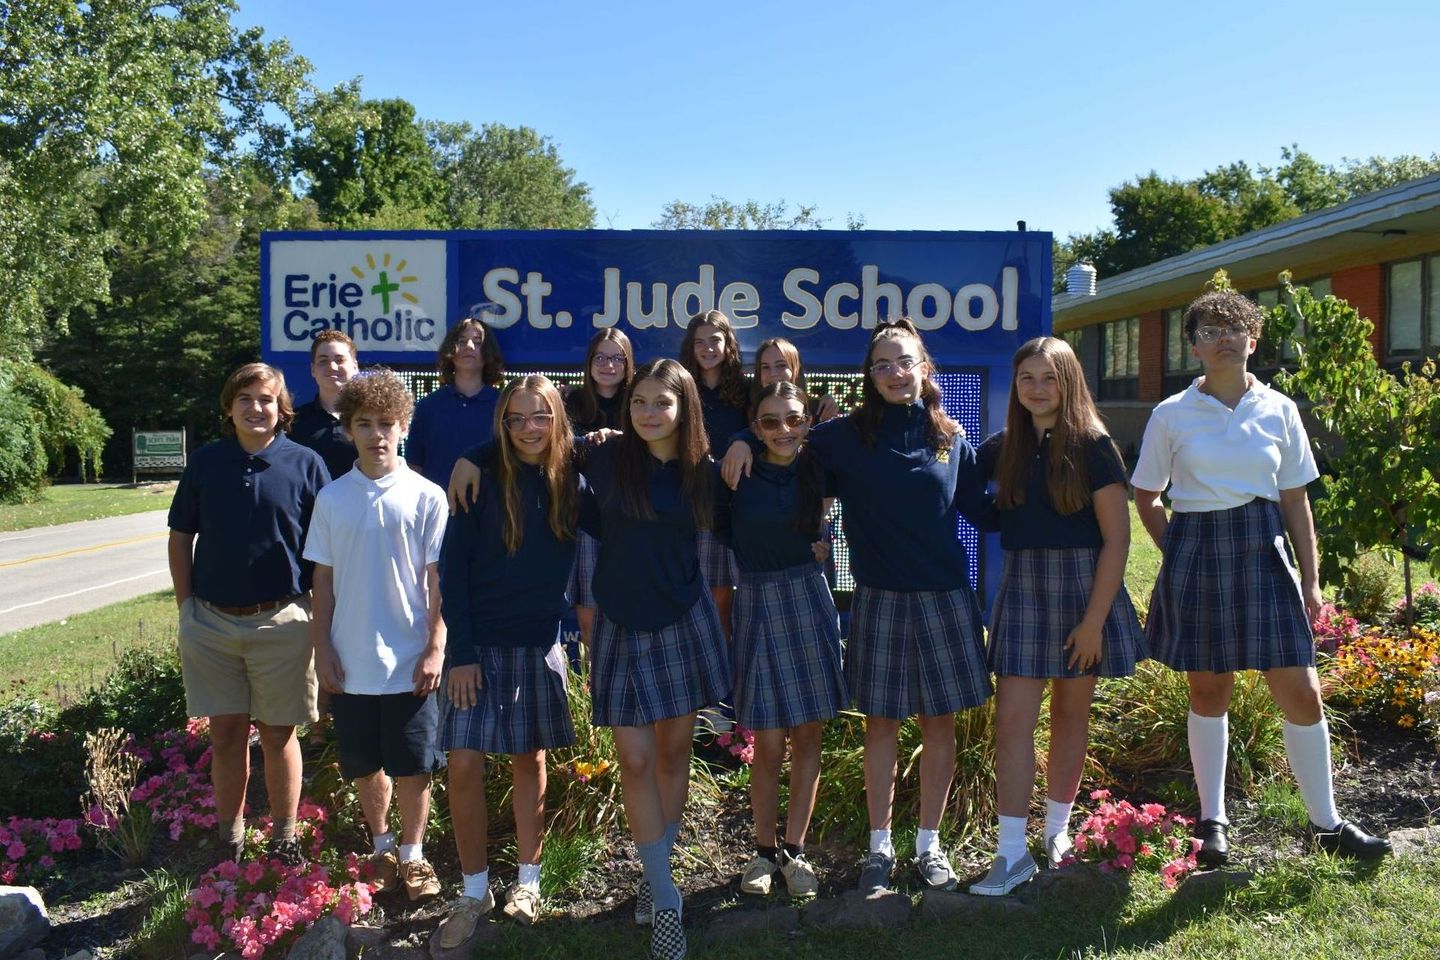 A group of children pose in front of a st. jude school sign